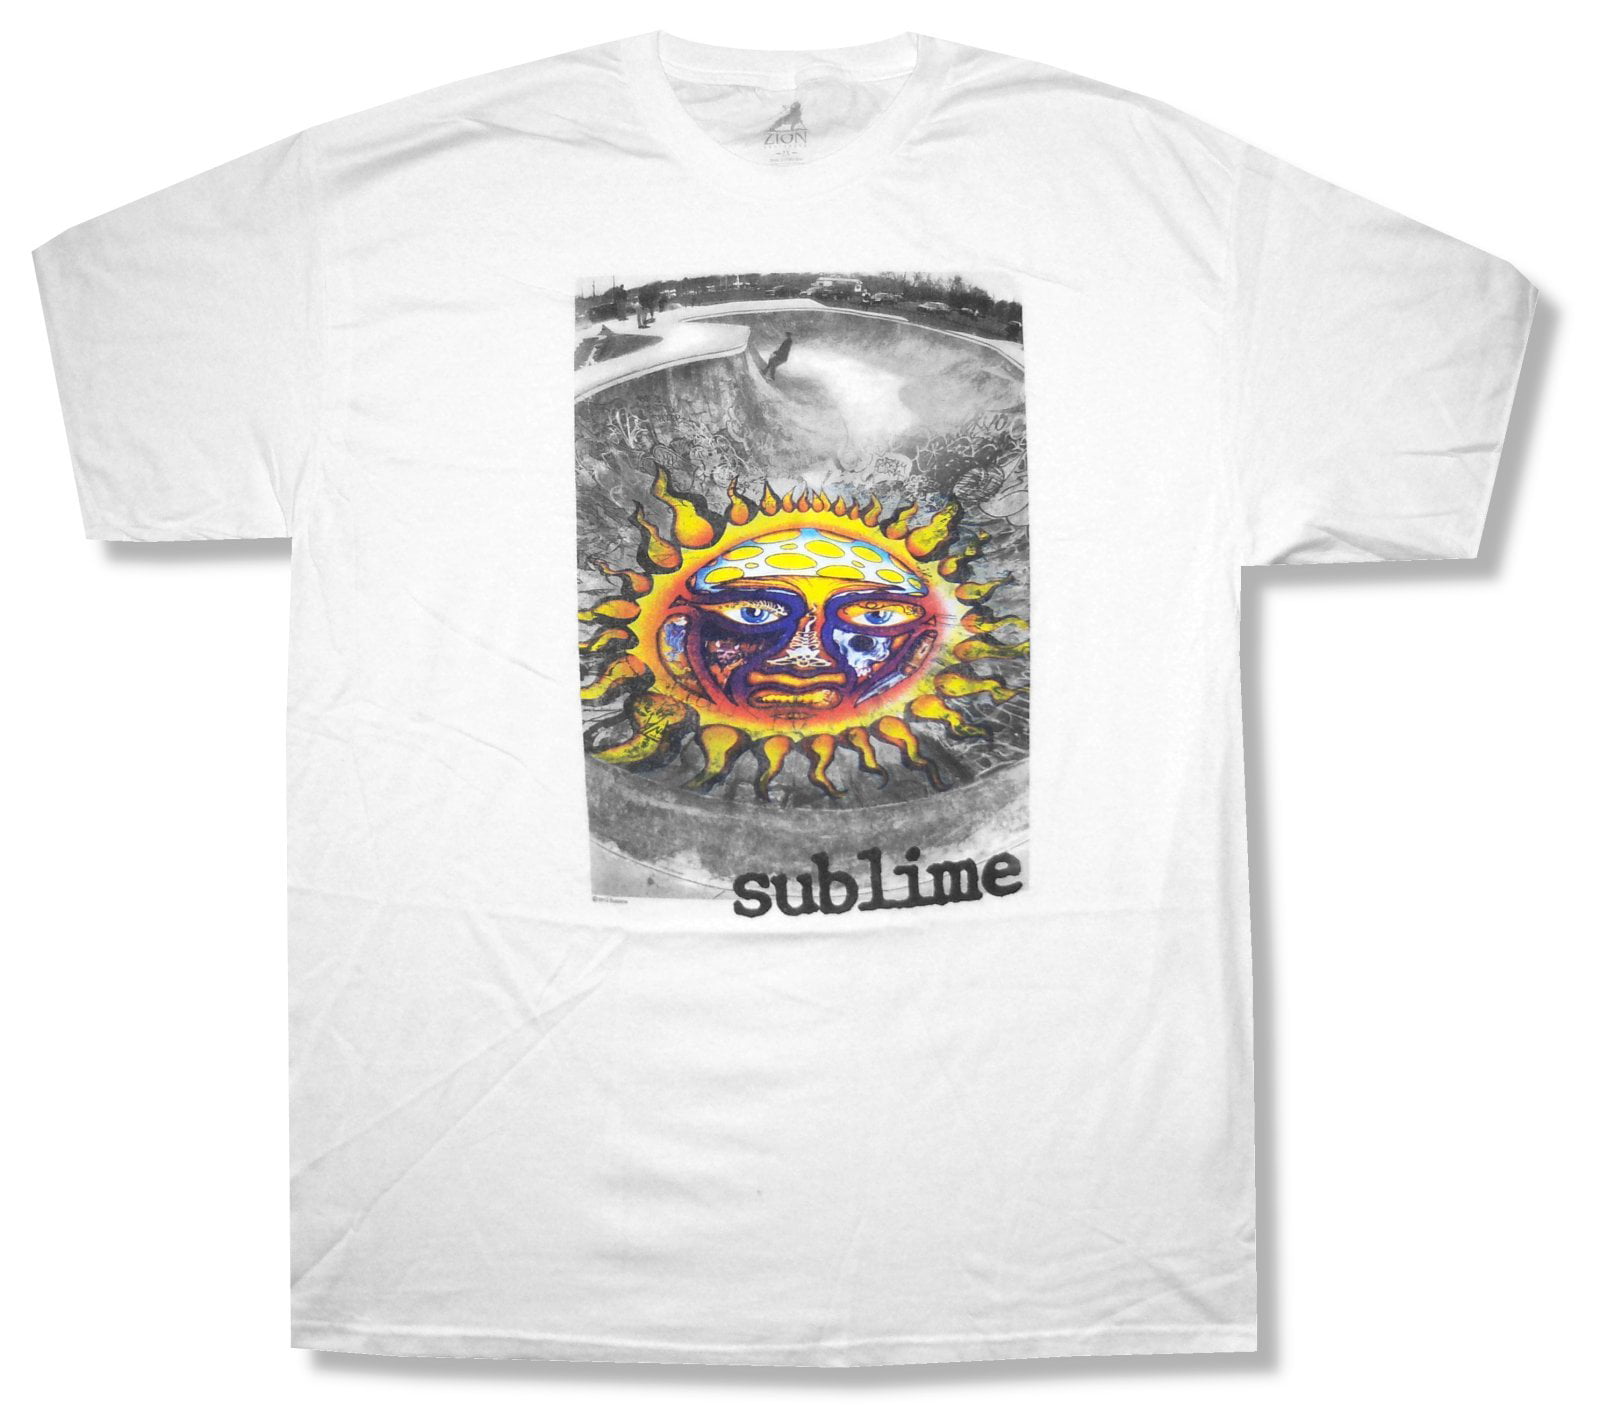 Sublime Catching the Waves Soft Adult Mens T-Shirt 